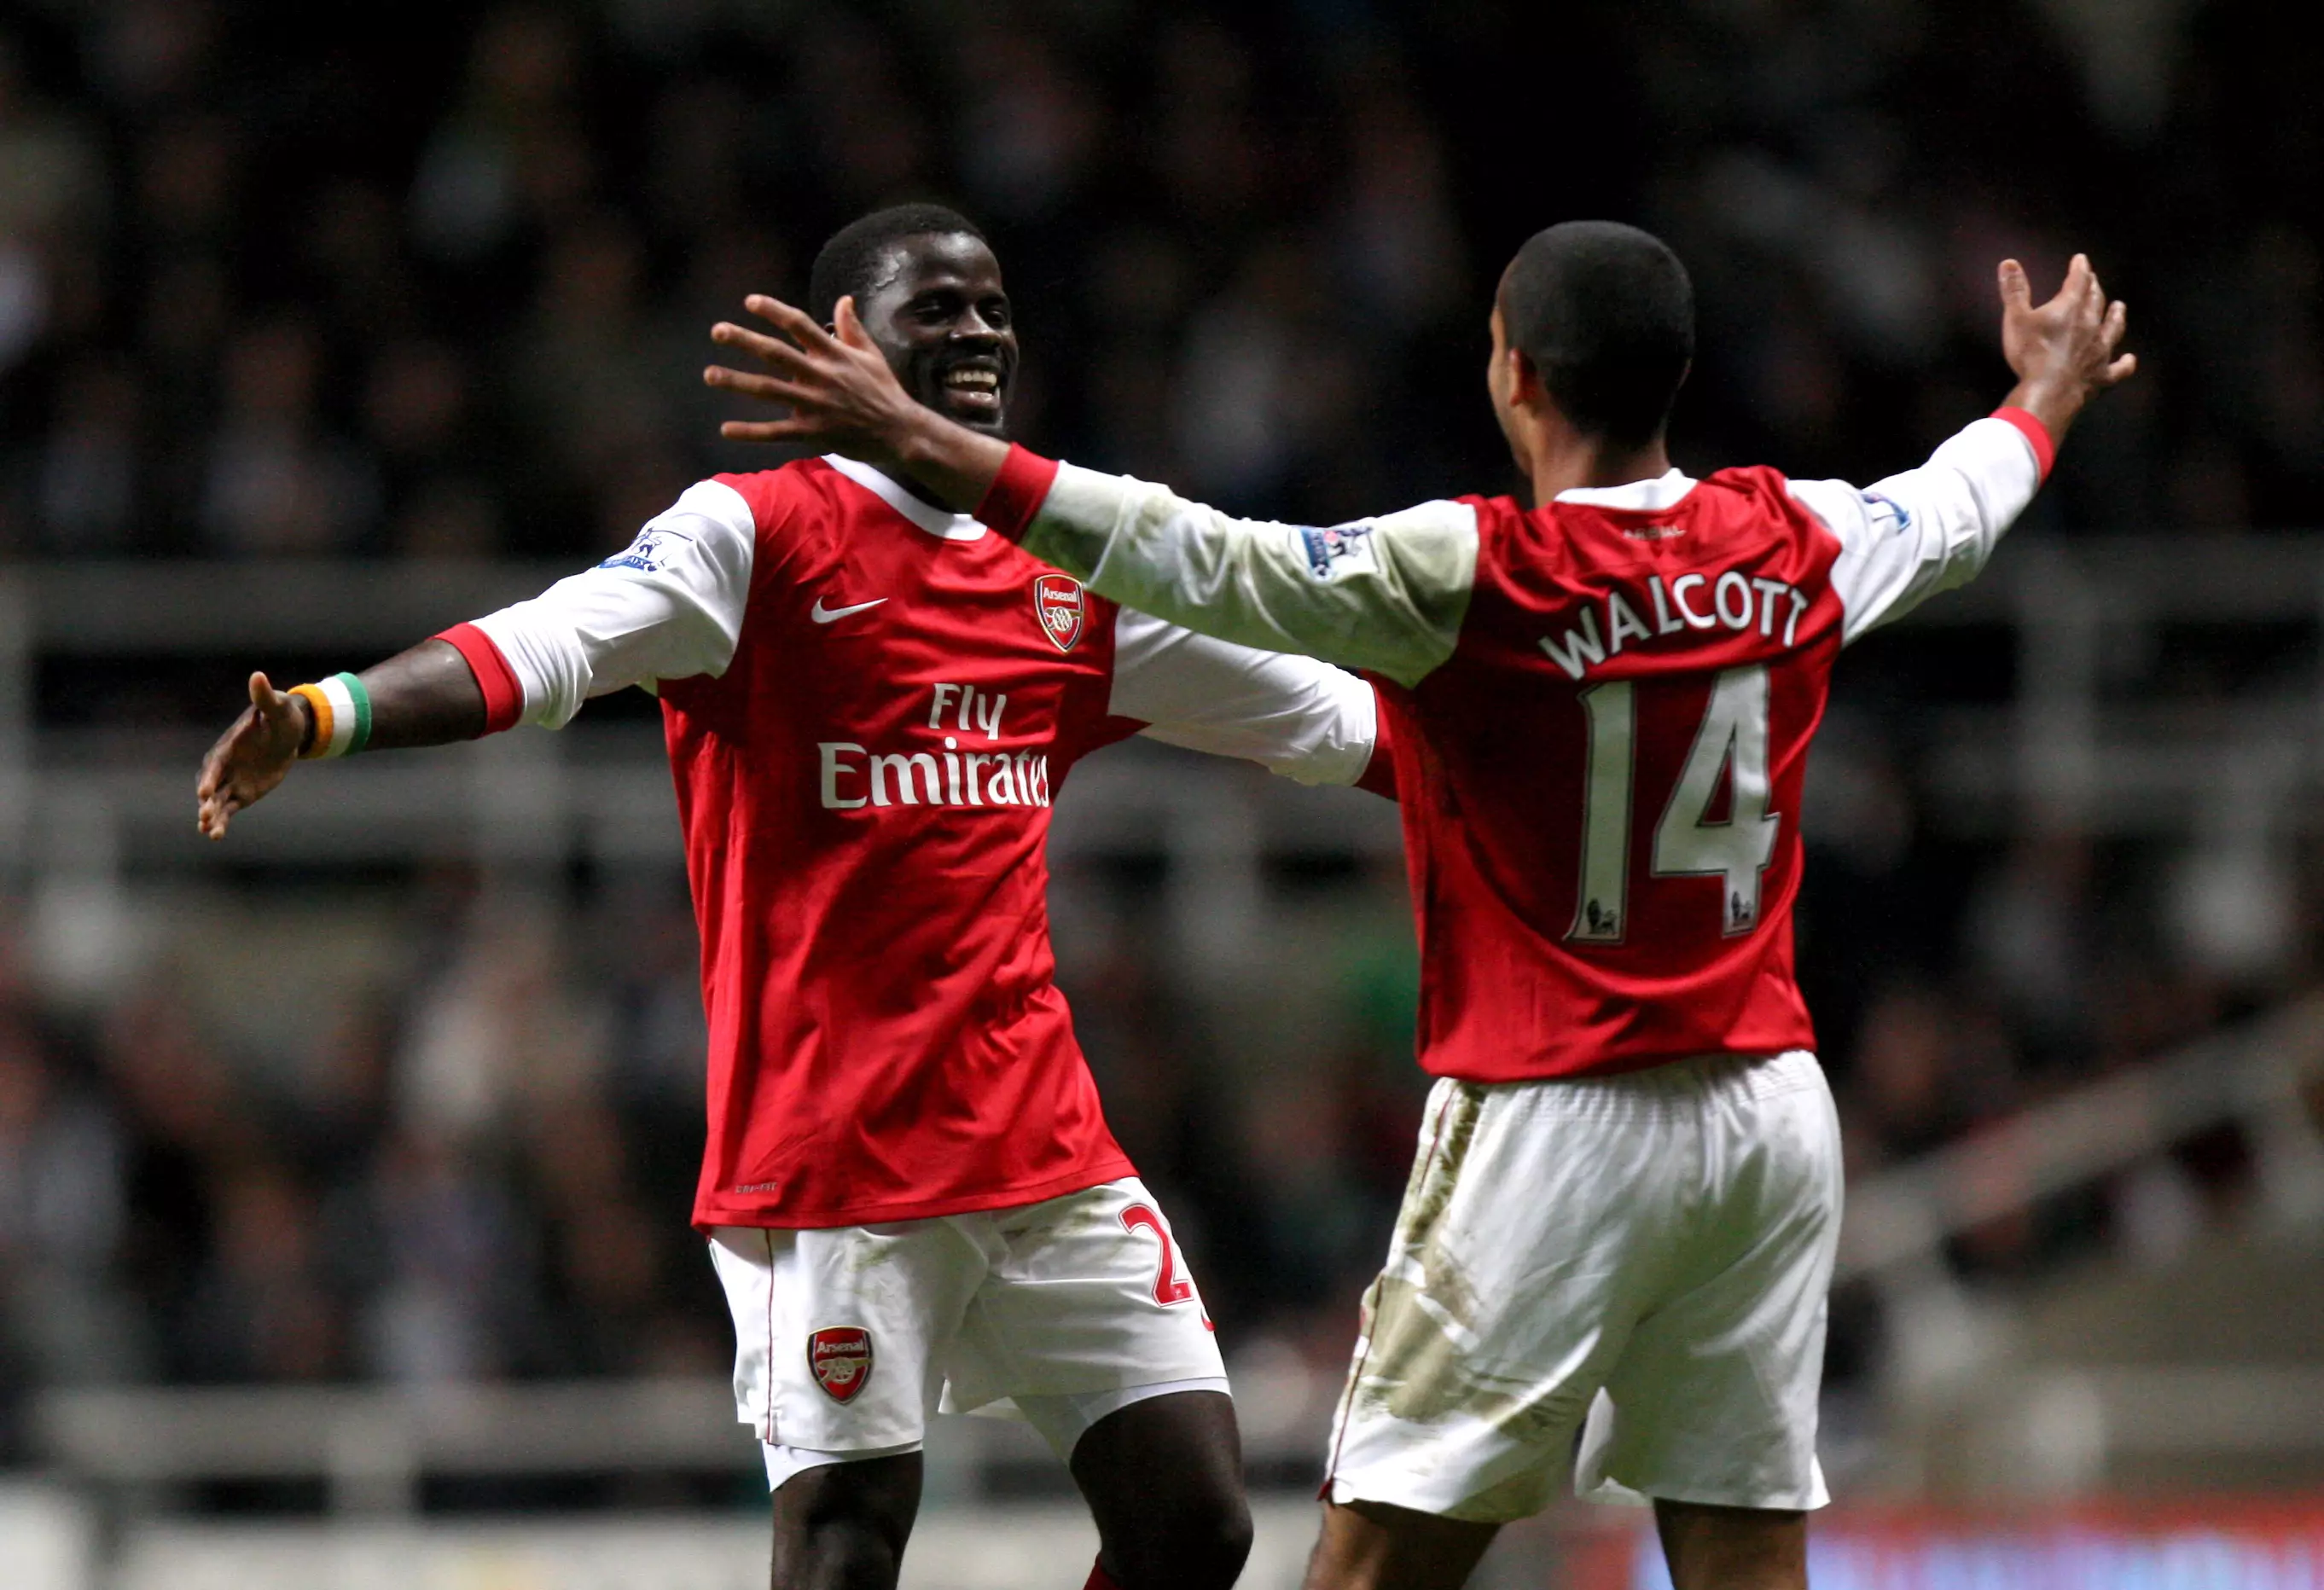 Eboue in happier times at Arsenal. Image: PA Images.